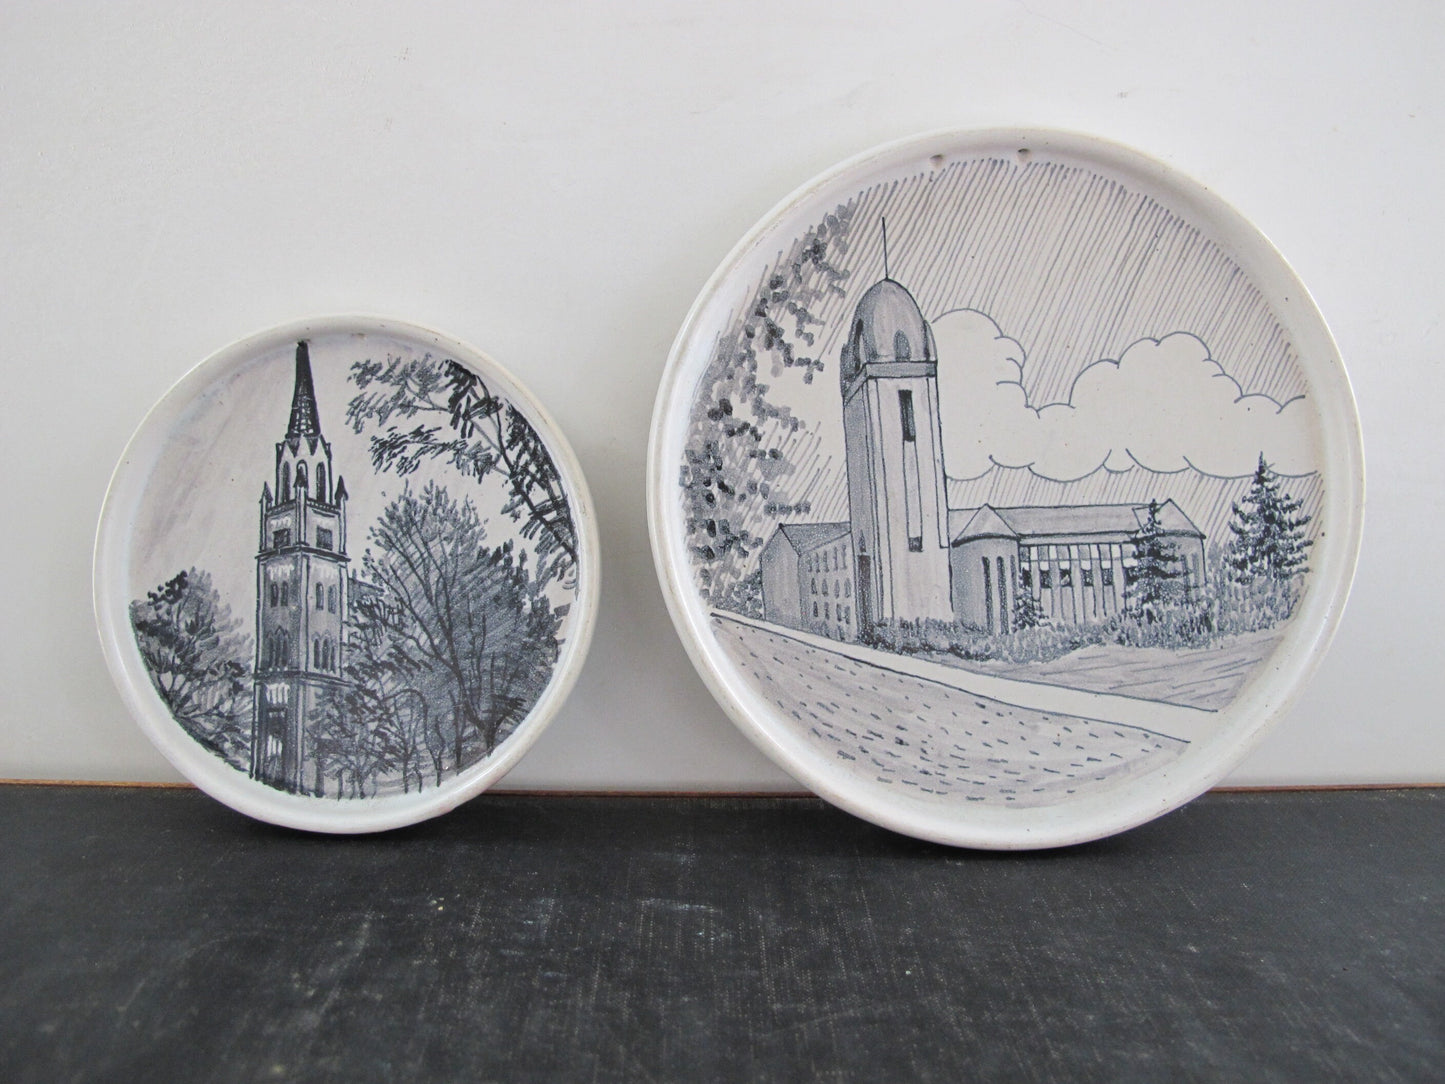 Finnish Art Pottery Kupittaan Savi Architectural Roundels Showing Modernist Buildings and Church c. 1950s 1960s